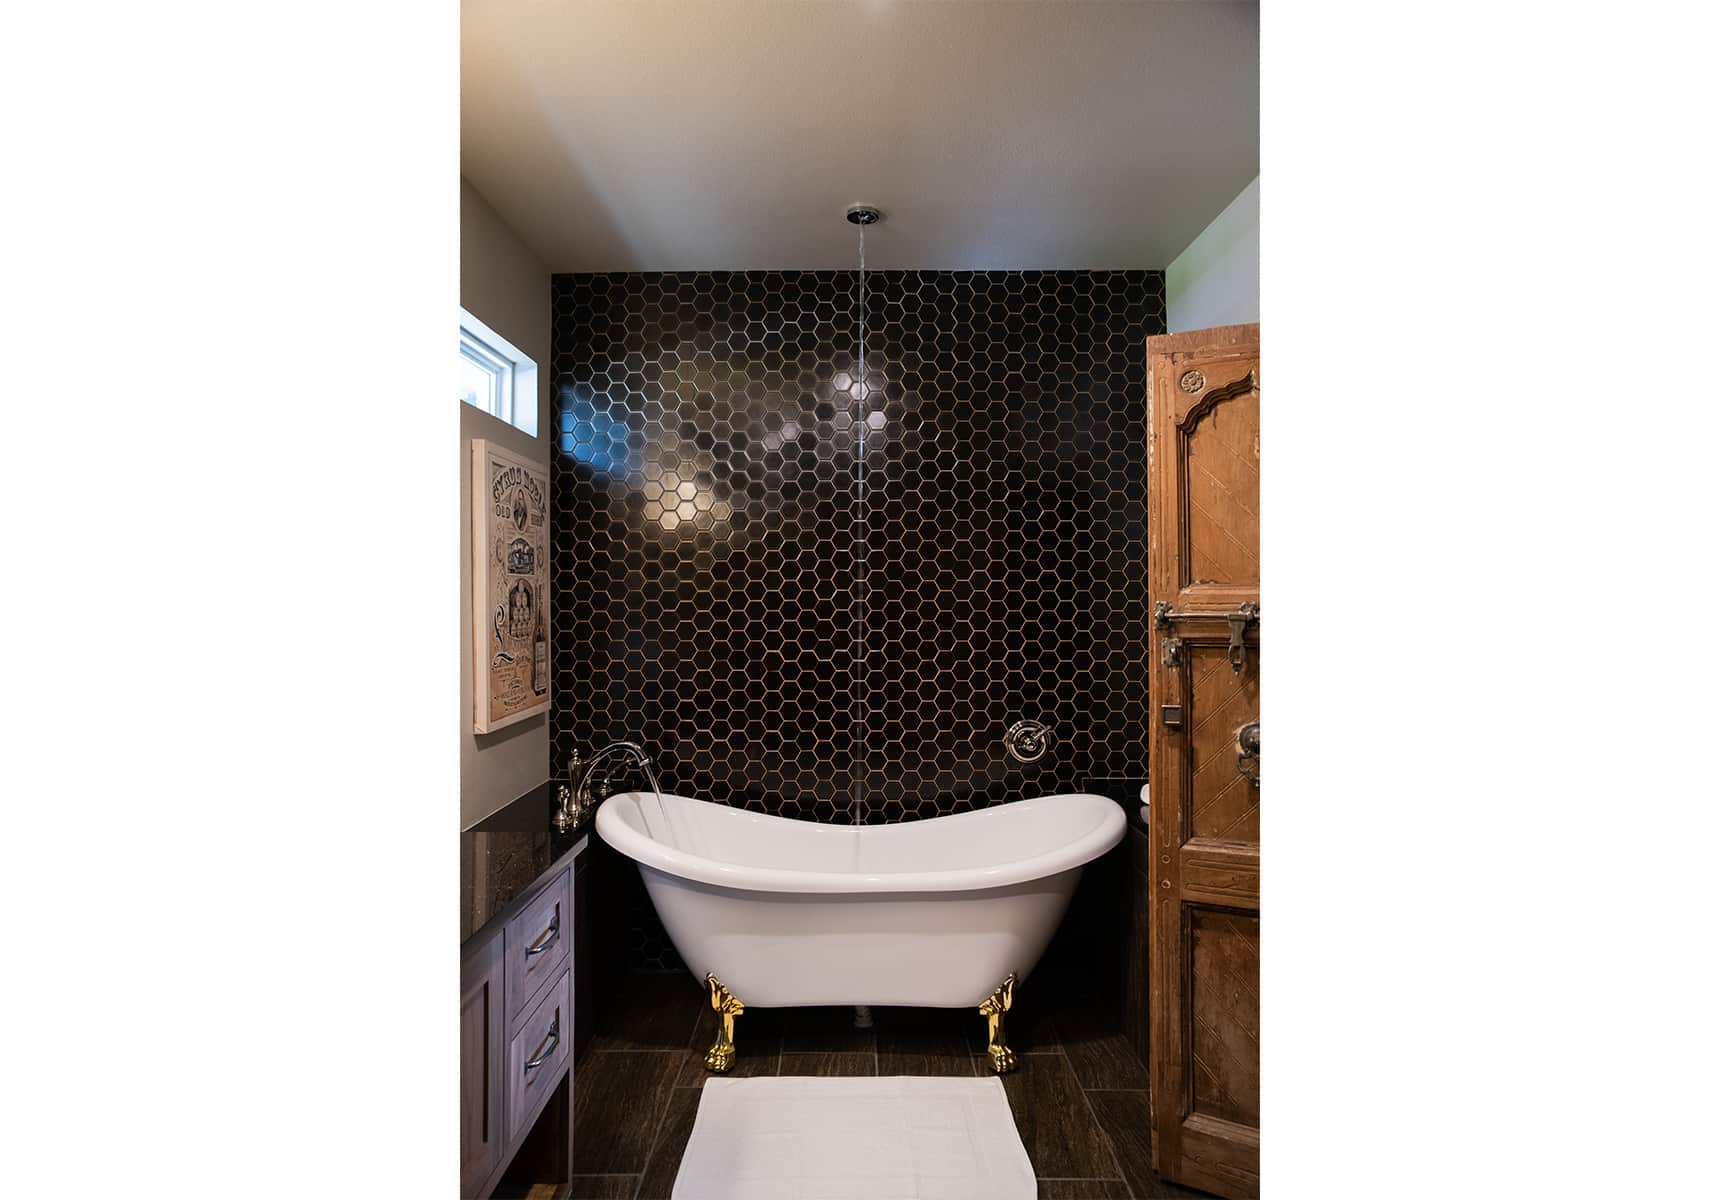 Clawfoot tub with a overhead waterspout on the ceiling